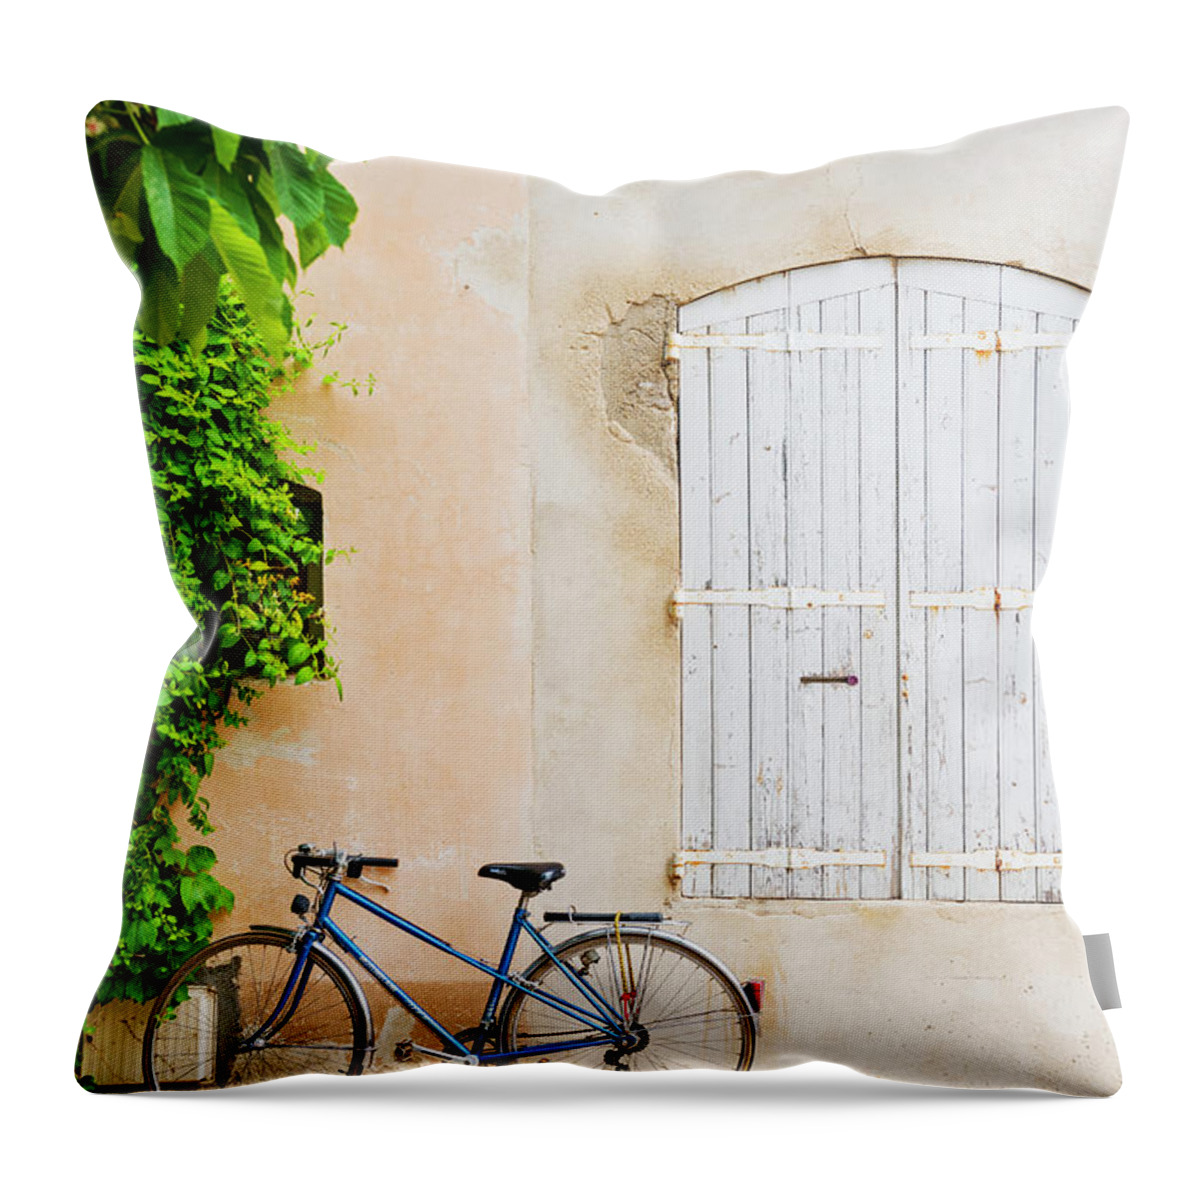 Estock Throw Pillow featuring the digital art France, Provence-alpes-cote D'azur, Saint-remy-de-provence, Bicycle And Shuttered Window by Jordan Banks